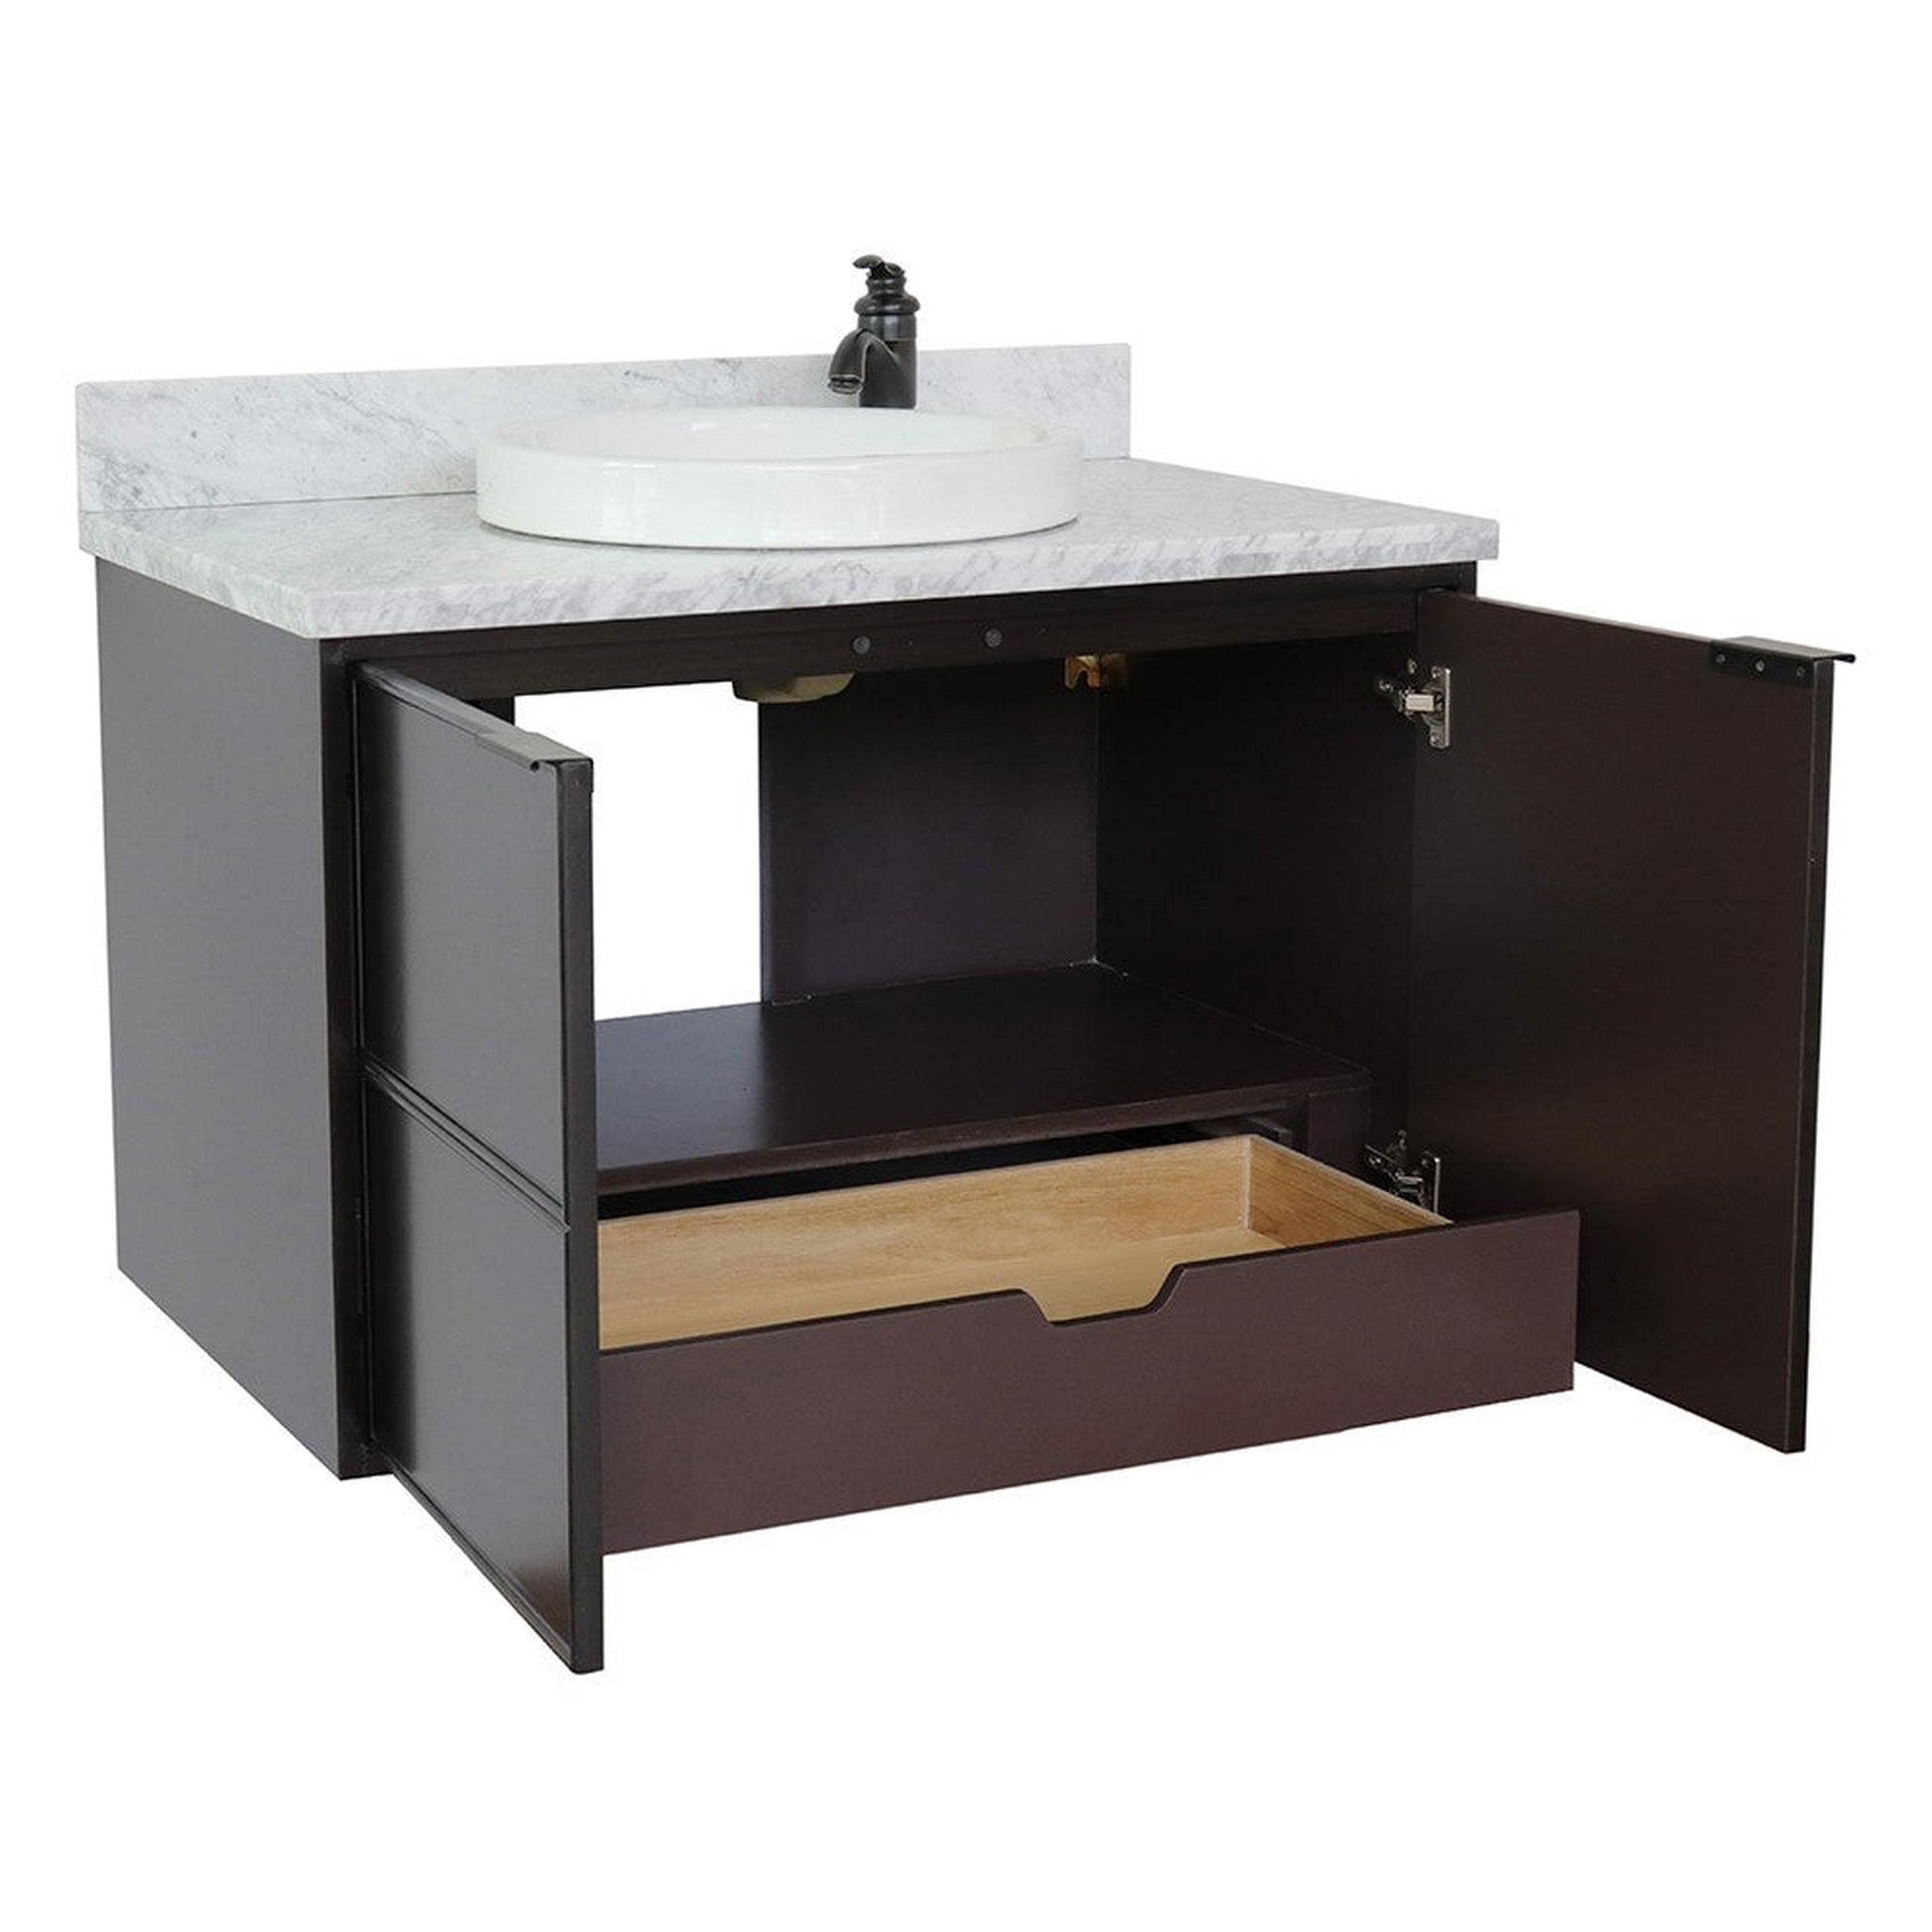 Bellaterra Home Cafe 37" 2-Door 1-Drawer Cappuccino Wall-Mount Vanity Set With Ceramic Vessel Sink and White Carrara Marble Top